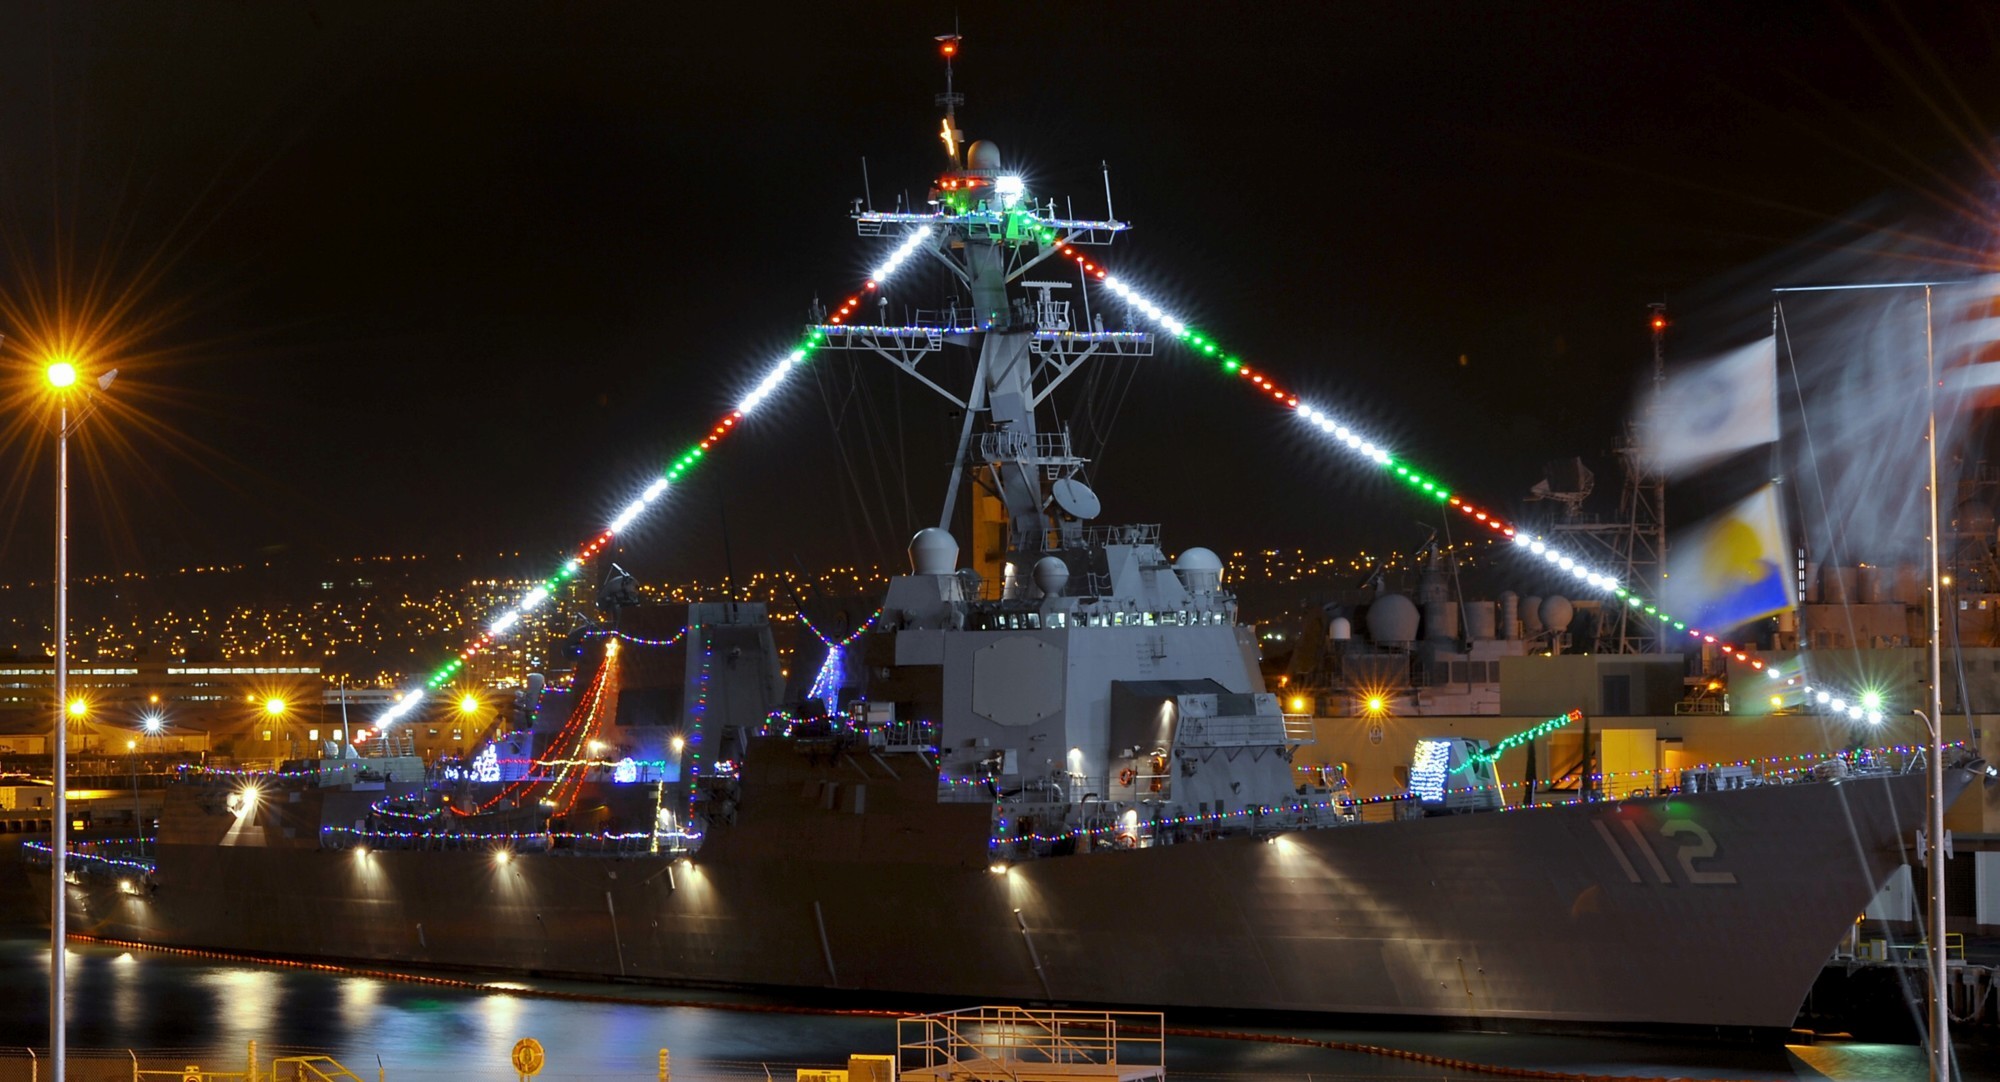 ddg-112 uss michael murphy arleigh burke class guided missile destroyer aegis us navy holiday lighs 10